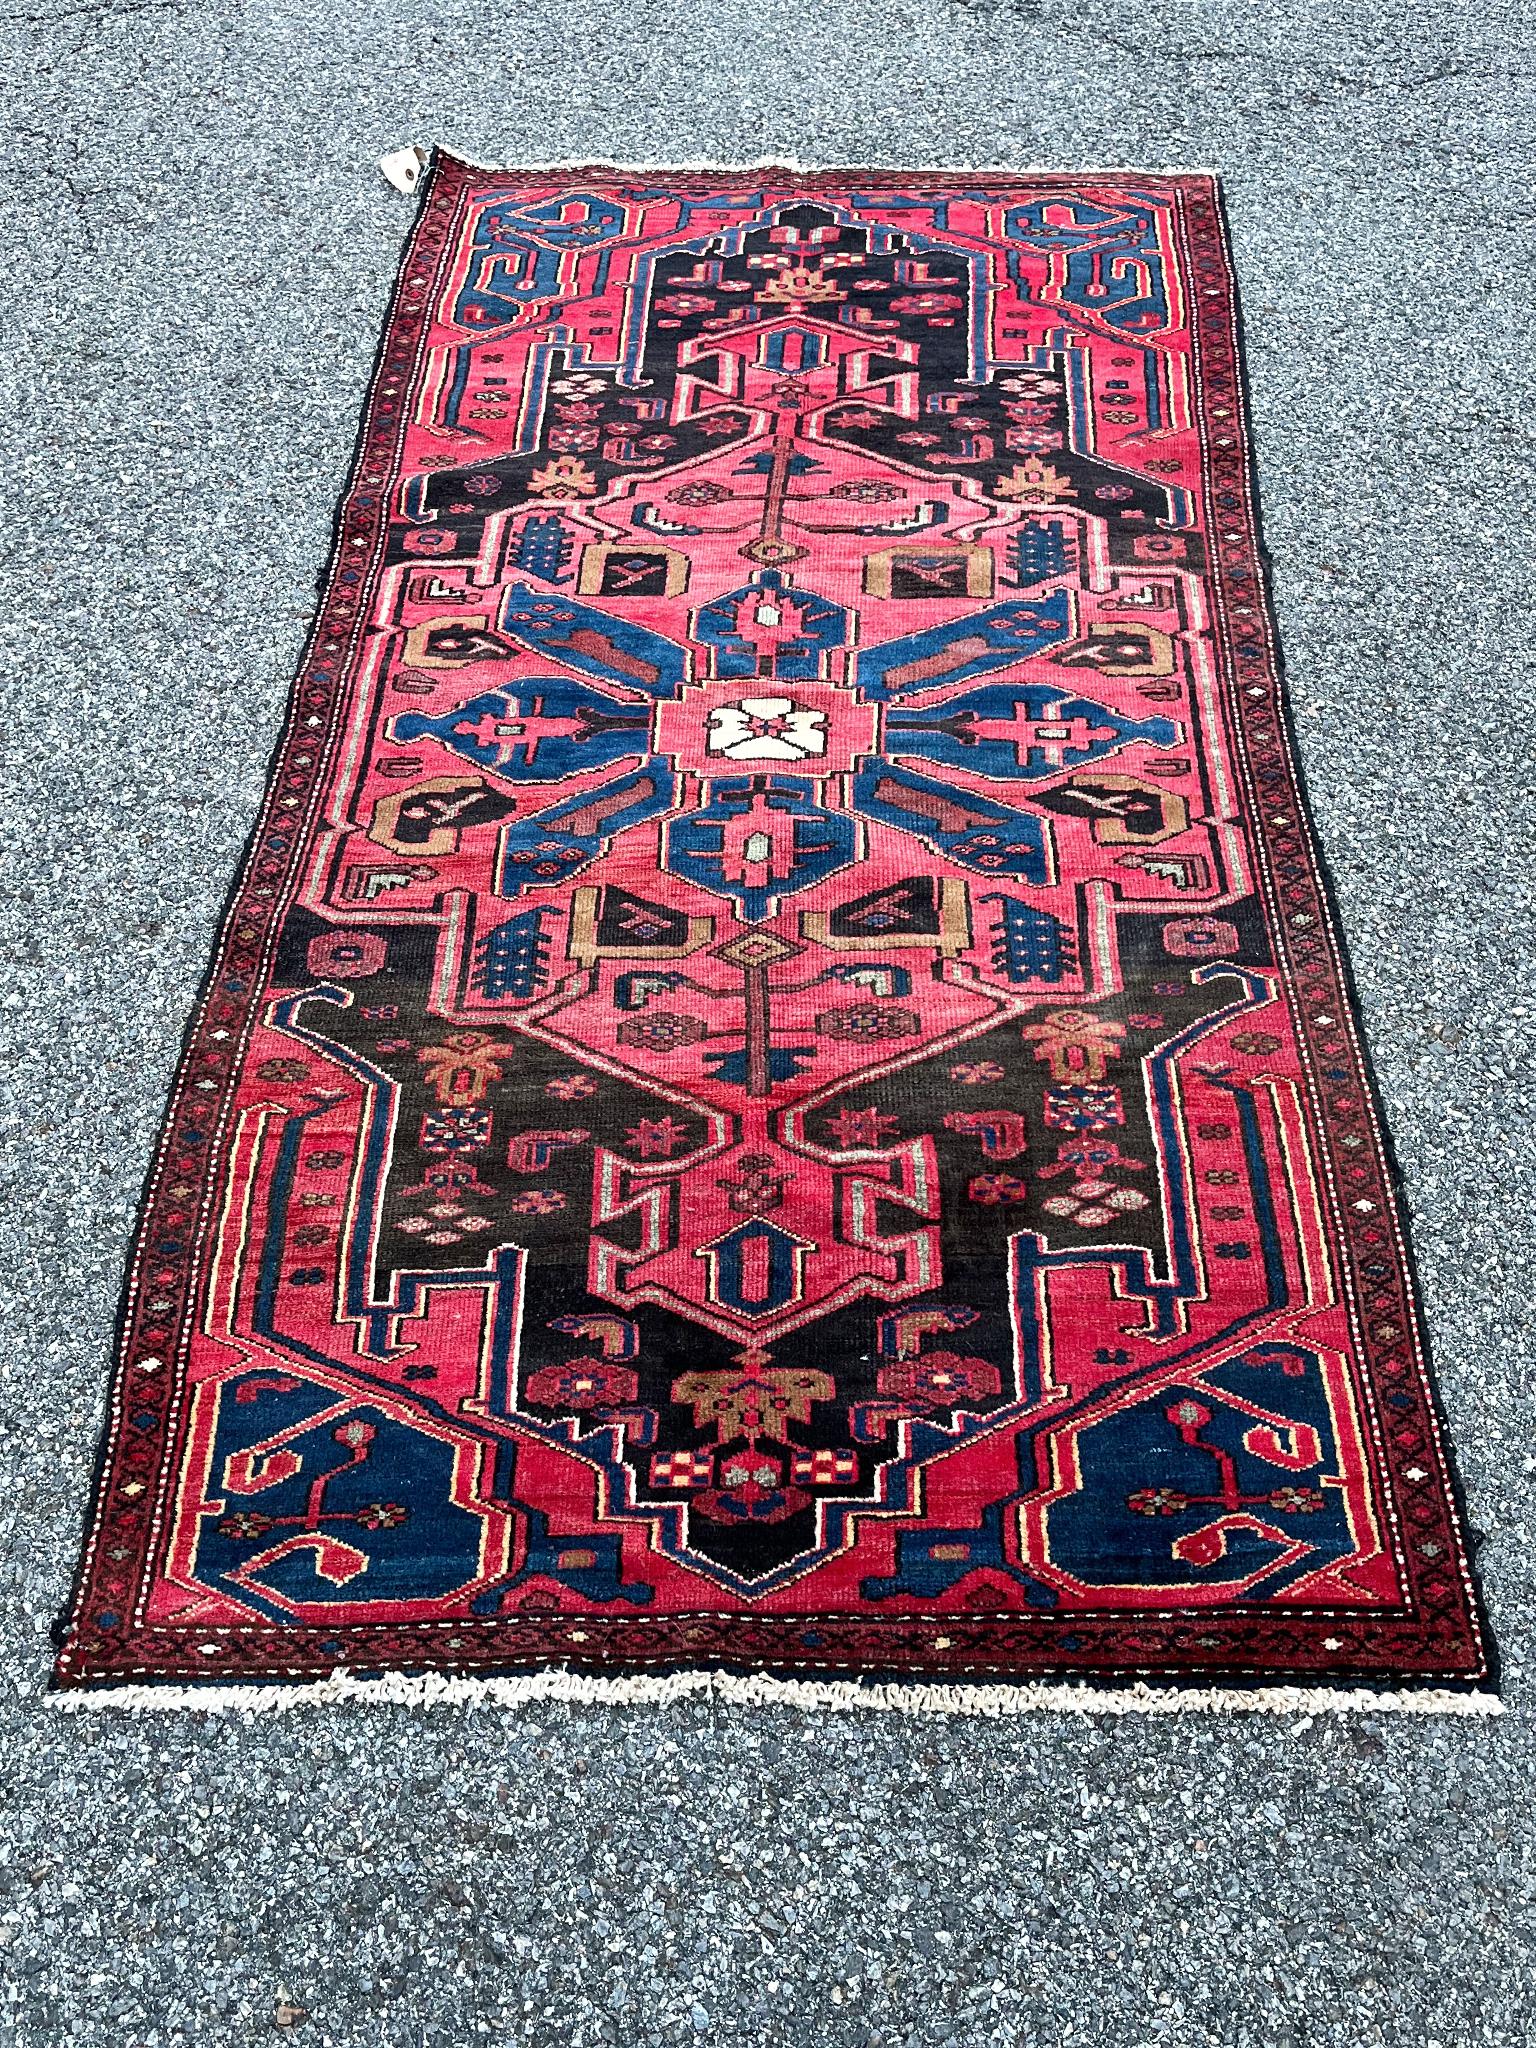 This beautiful Zanjan rug was handmade in the Mid-20th Century. It stands out for its rich, bright palette of red, blue, and black. The design features a large, central medallion composed of a floral, geometric motif.

Dimensions:
3' 5